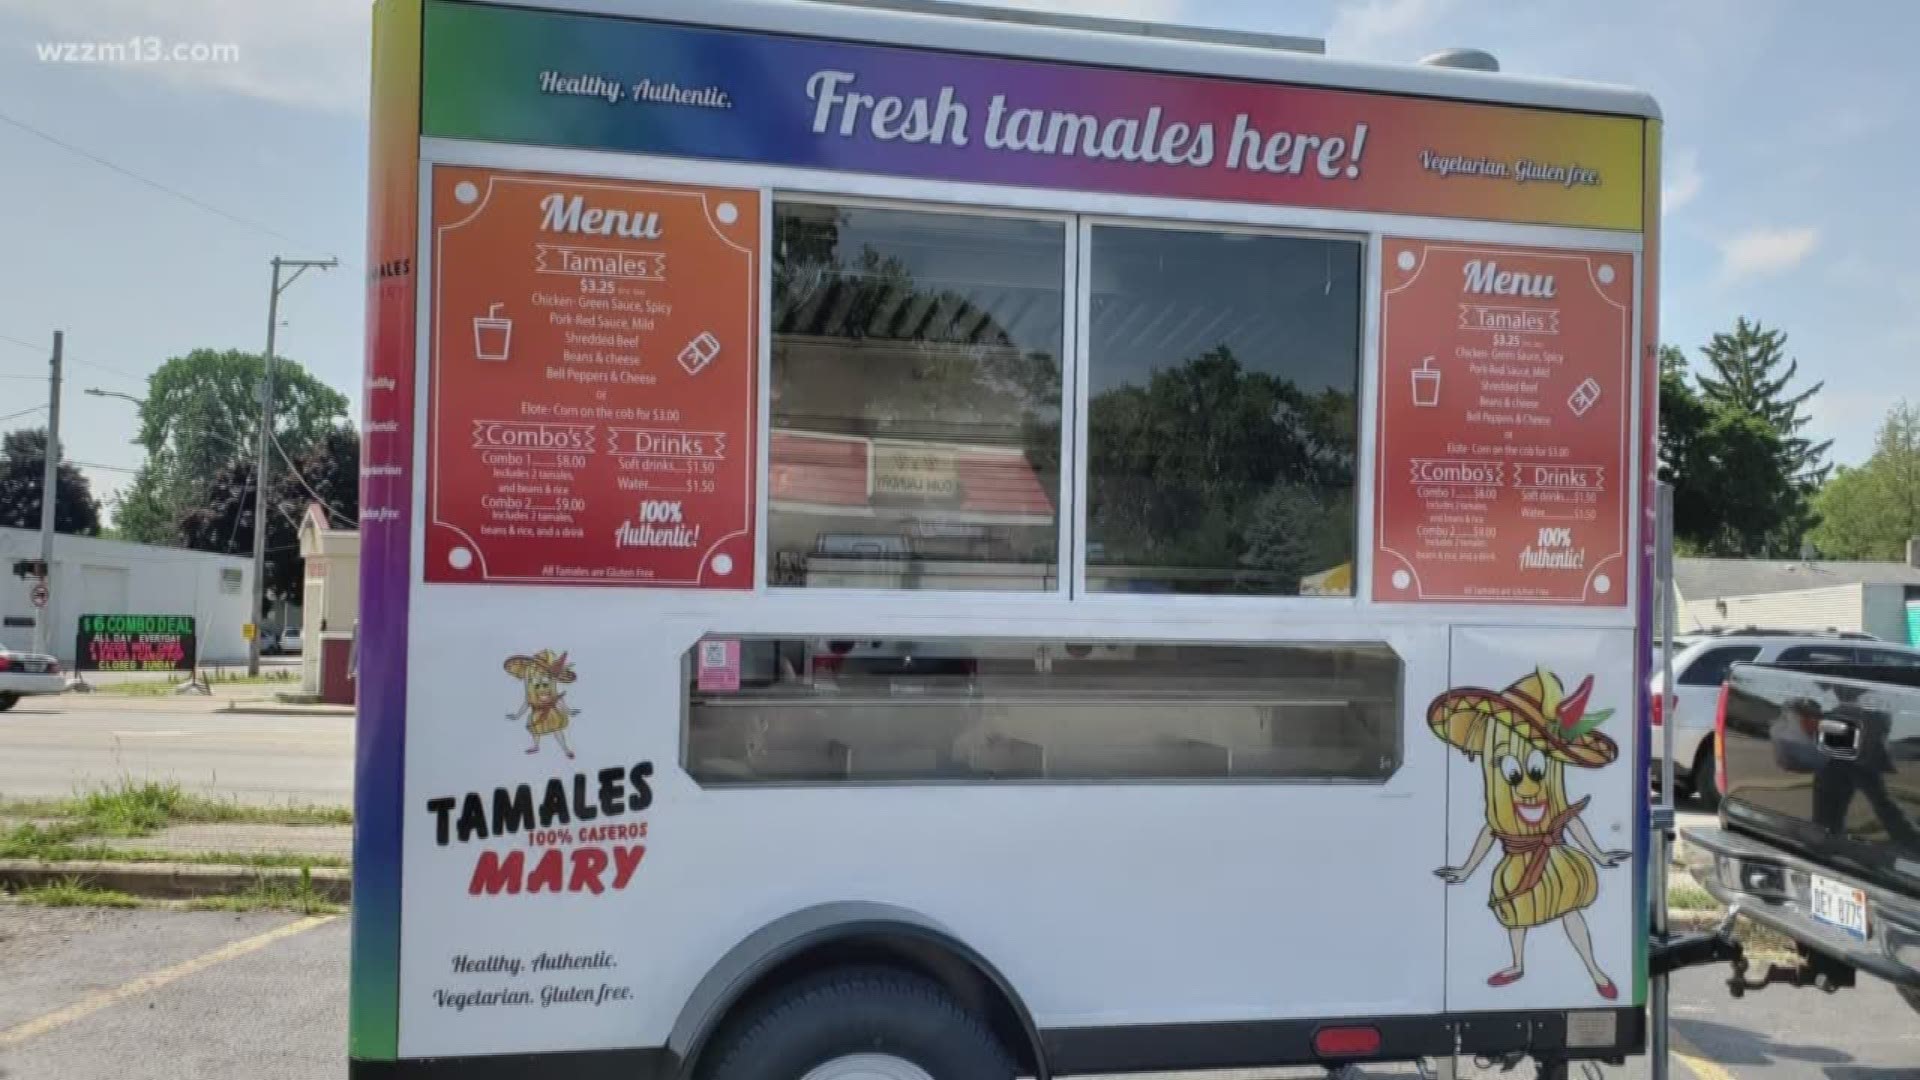 Tamales Mary gets food cart from Walker company